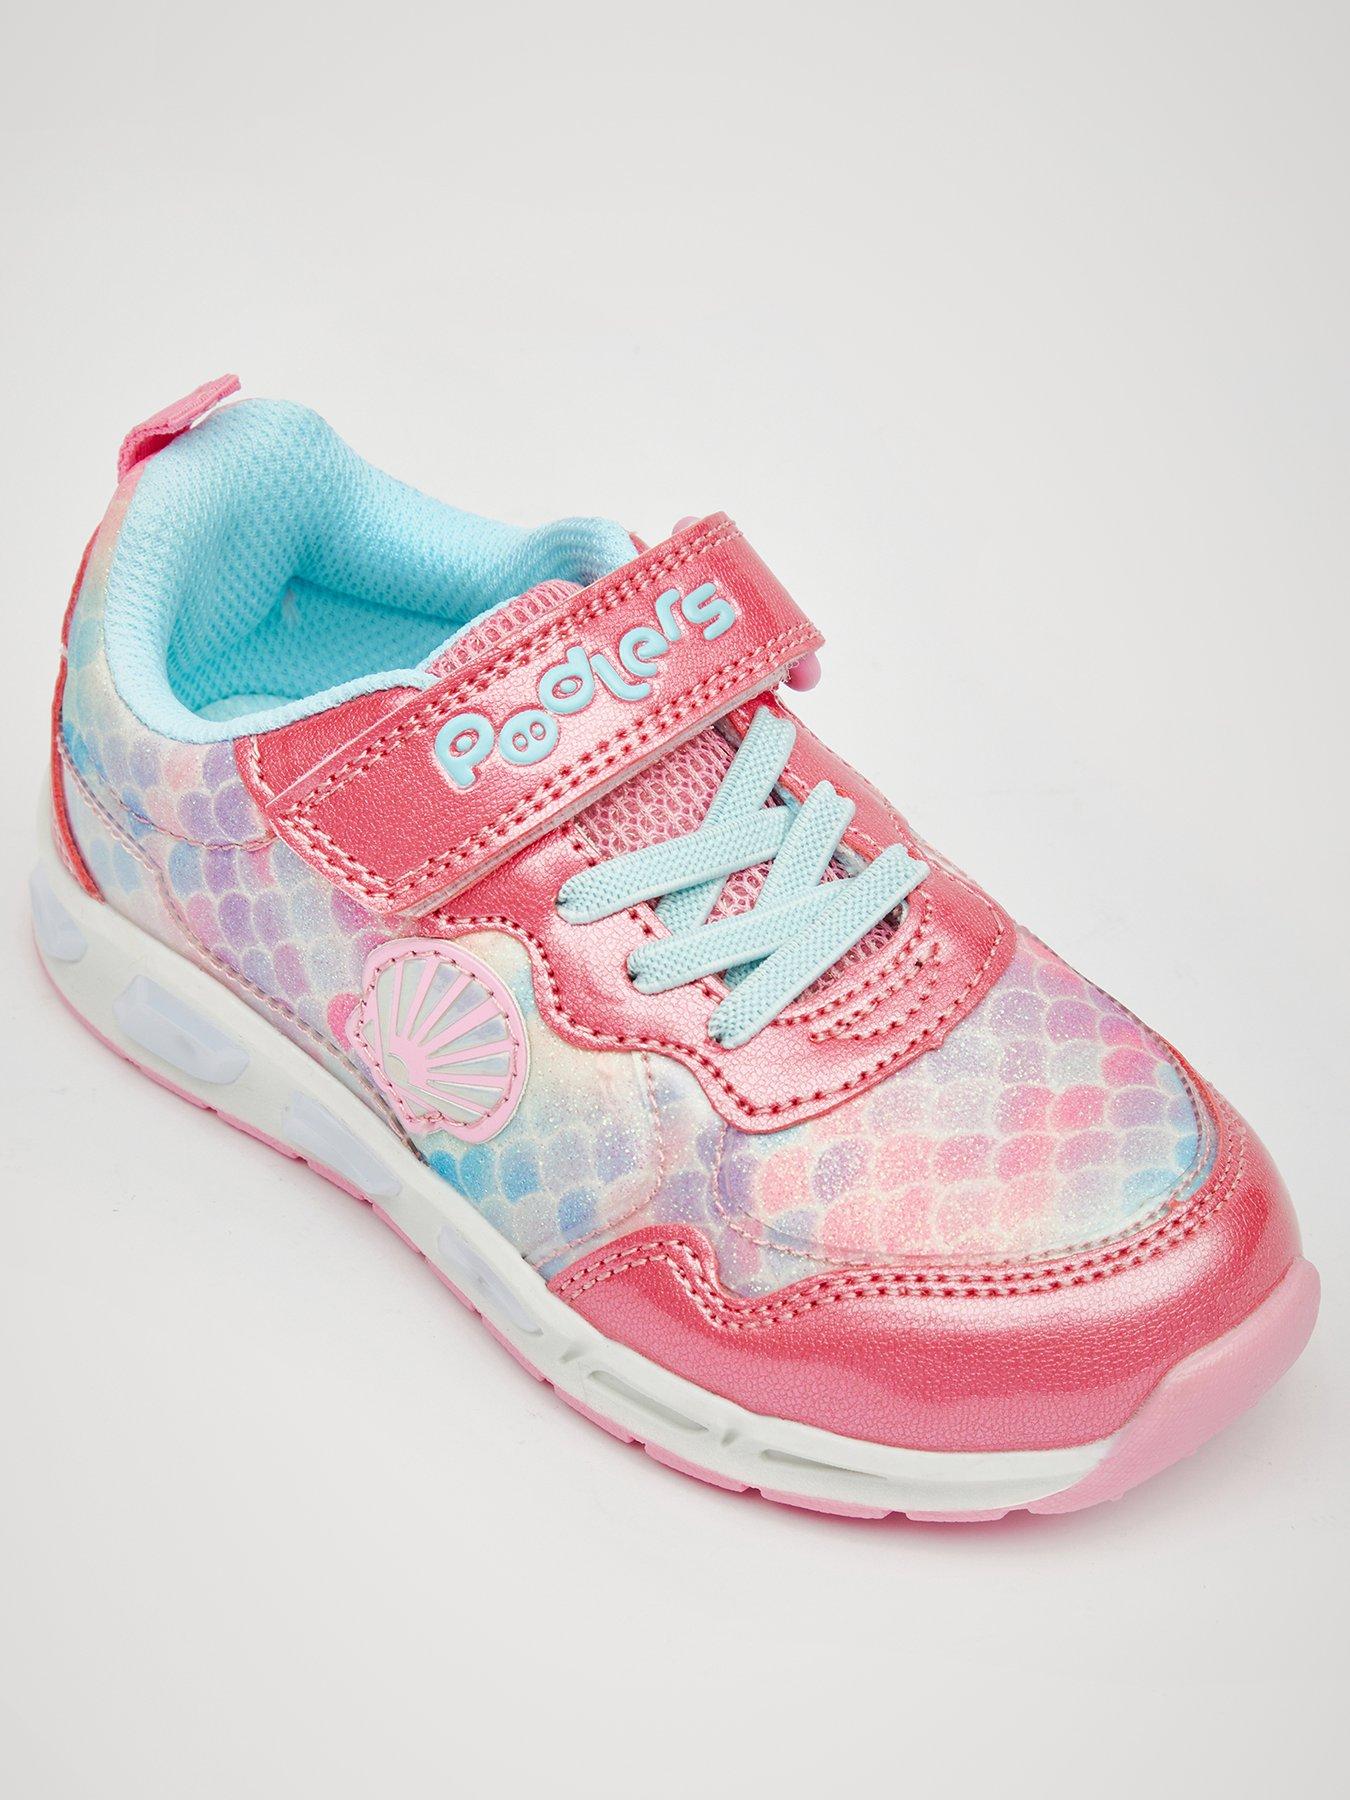 Trainers Pod Jx Mermaid Trainer - Navy/Pink